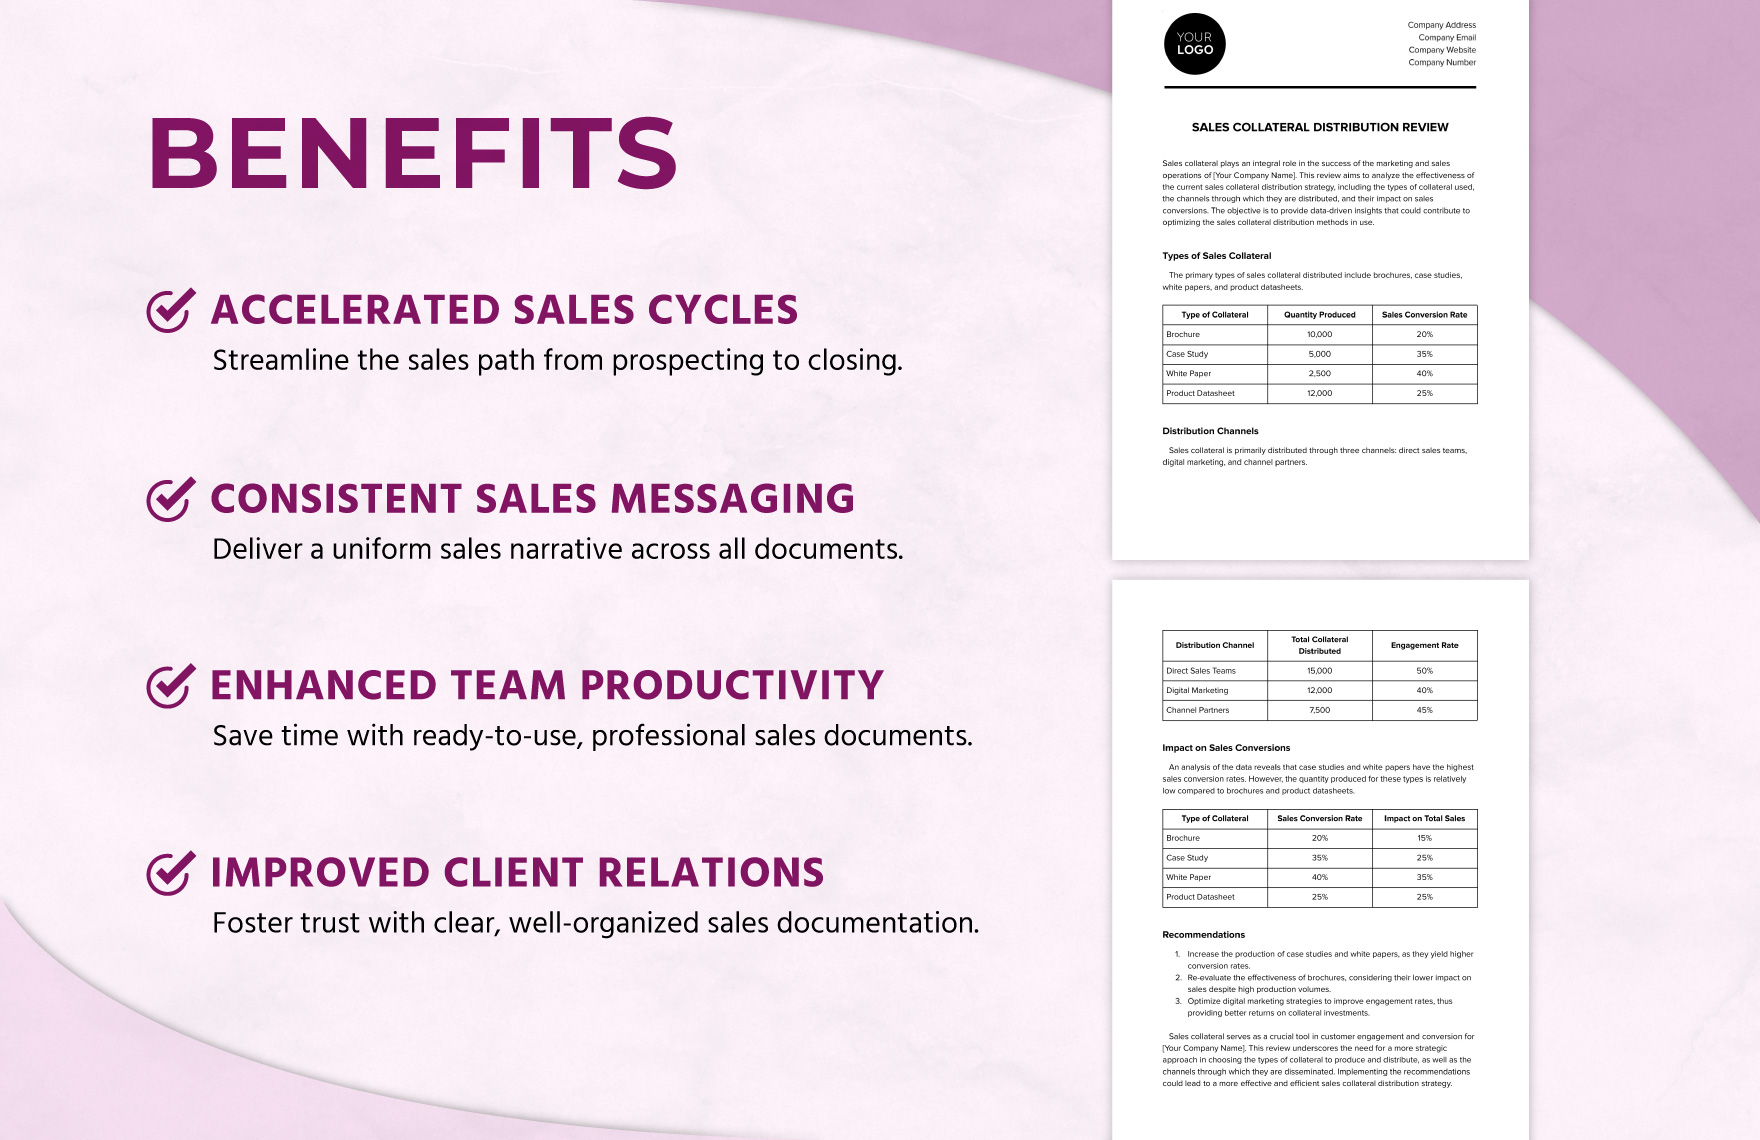 Sales Collateral Distribution Review Template